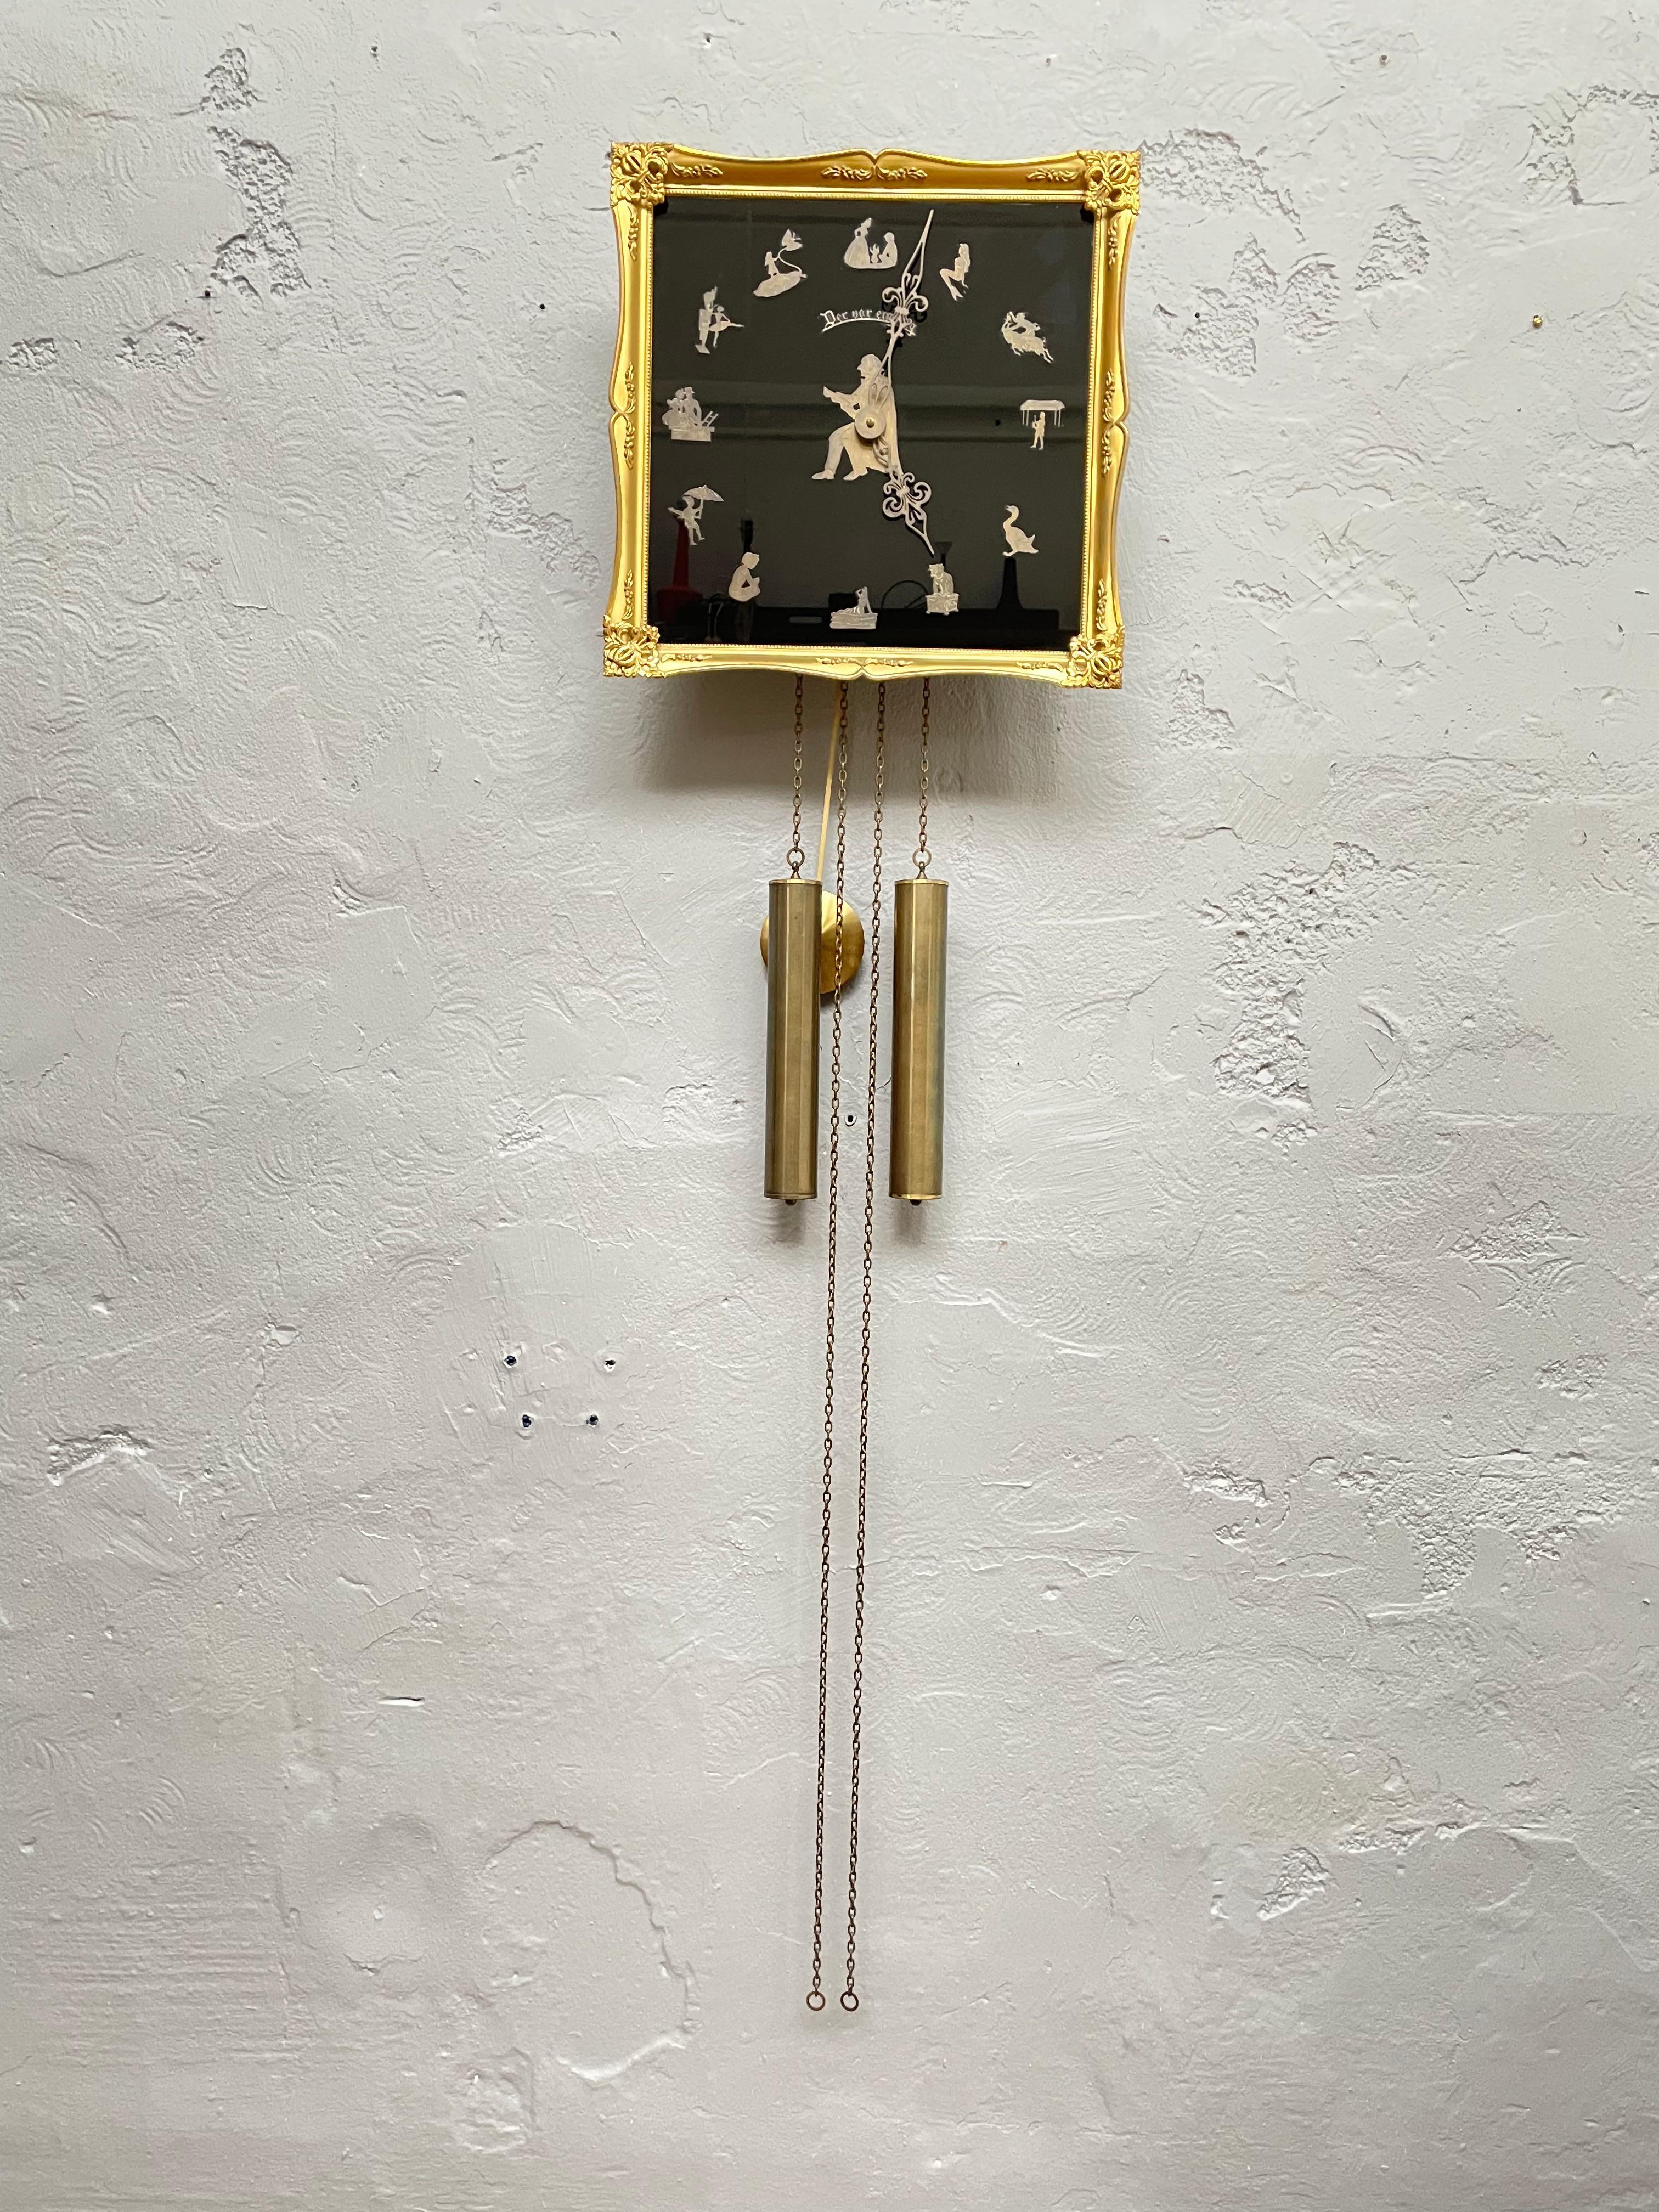 Vintage Lund and Clausen of Copenhagen Han’s Christian Andersen pendulum wall clock from the 1960s.
With the title “once upon a time”
12 of his most famous fairy tales one for each hour.
In lovely working condition and with very pleasant chimes on